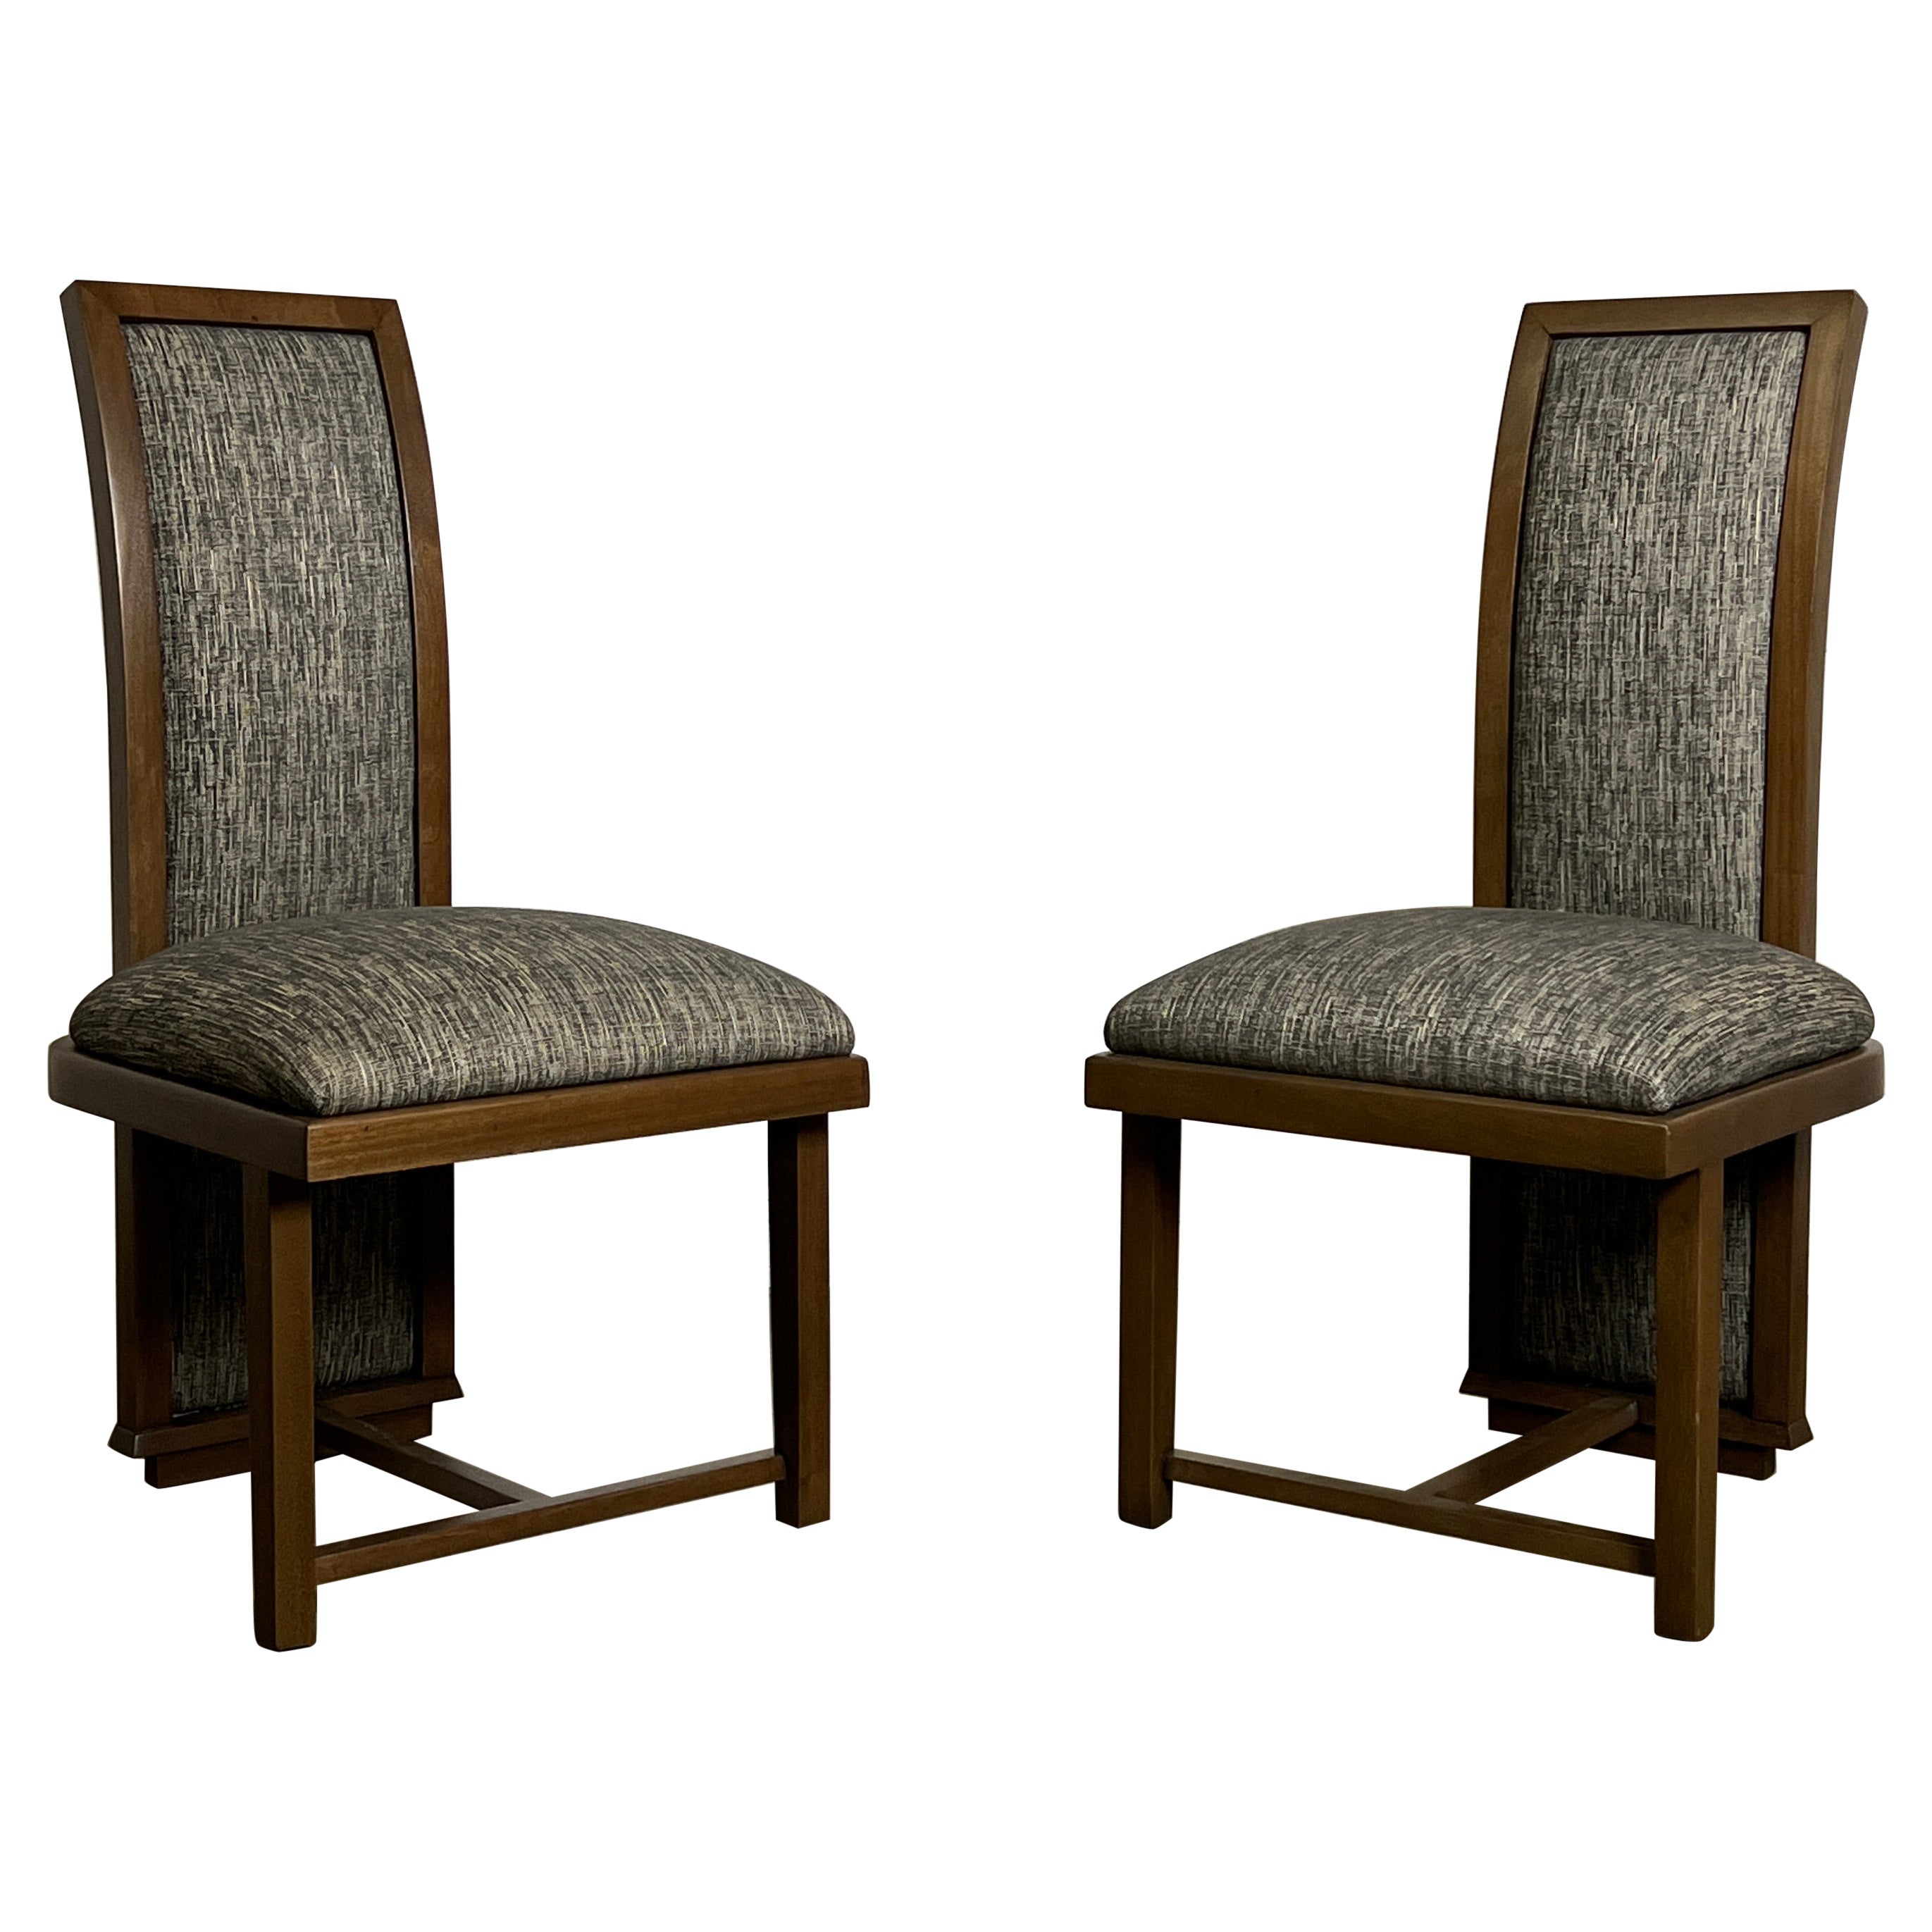 Pair of High Back Chairs by Frank Lloyd Wright For Sale